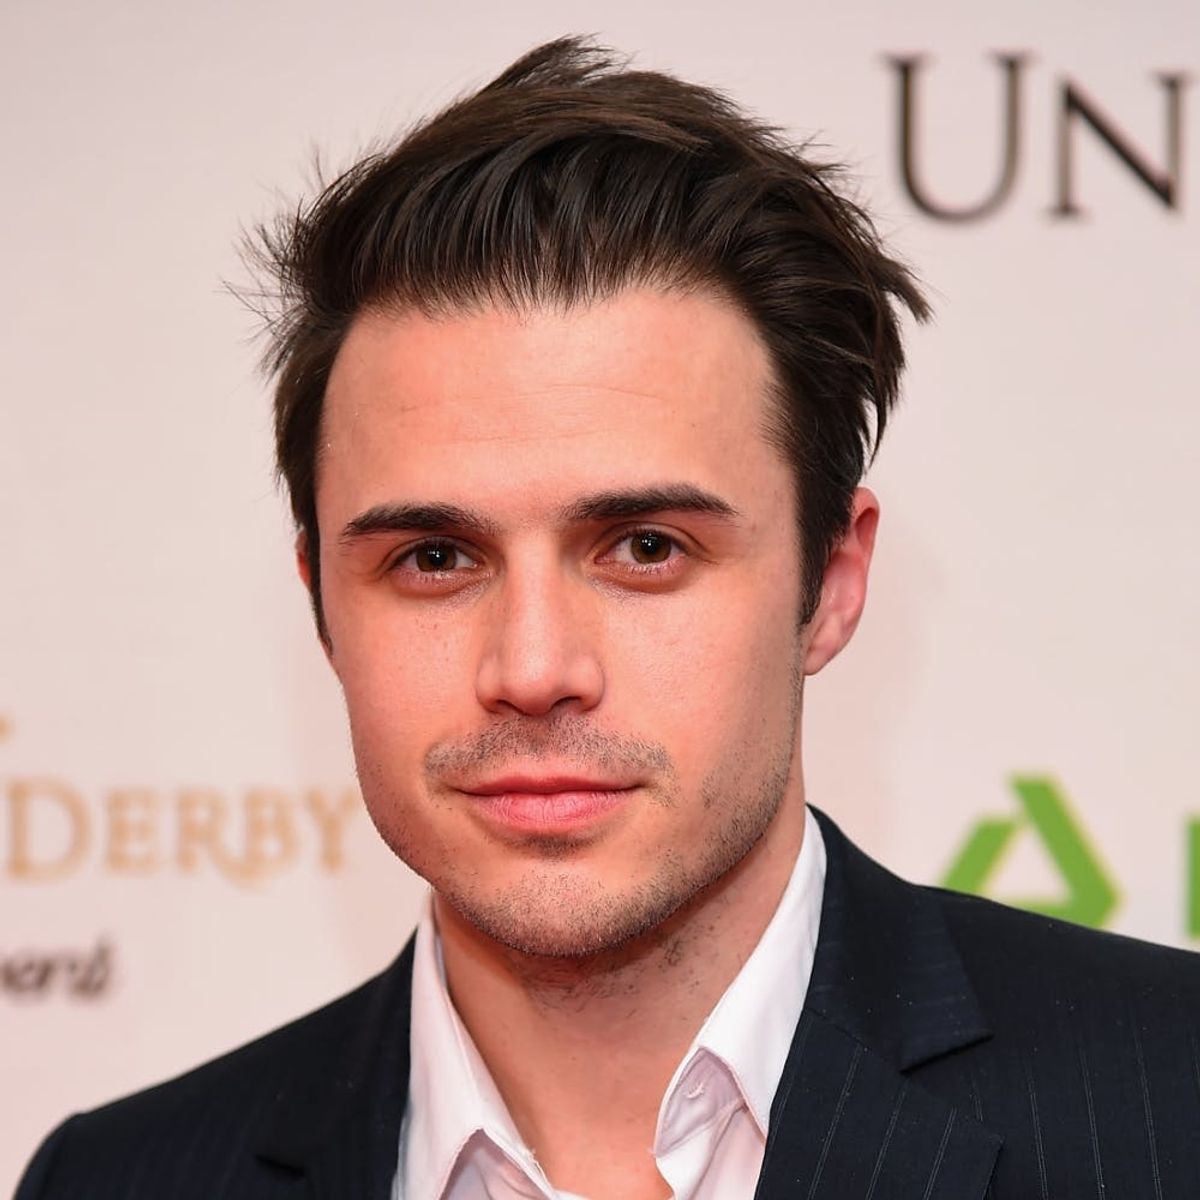 Kris Allen Welcomes a Baby Girl With a Sweet Summer Name